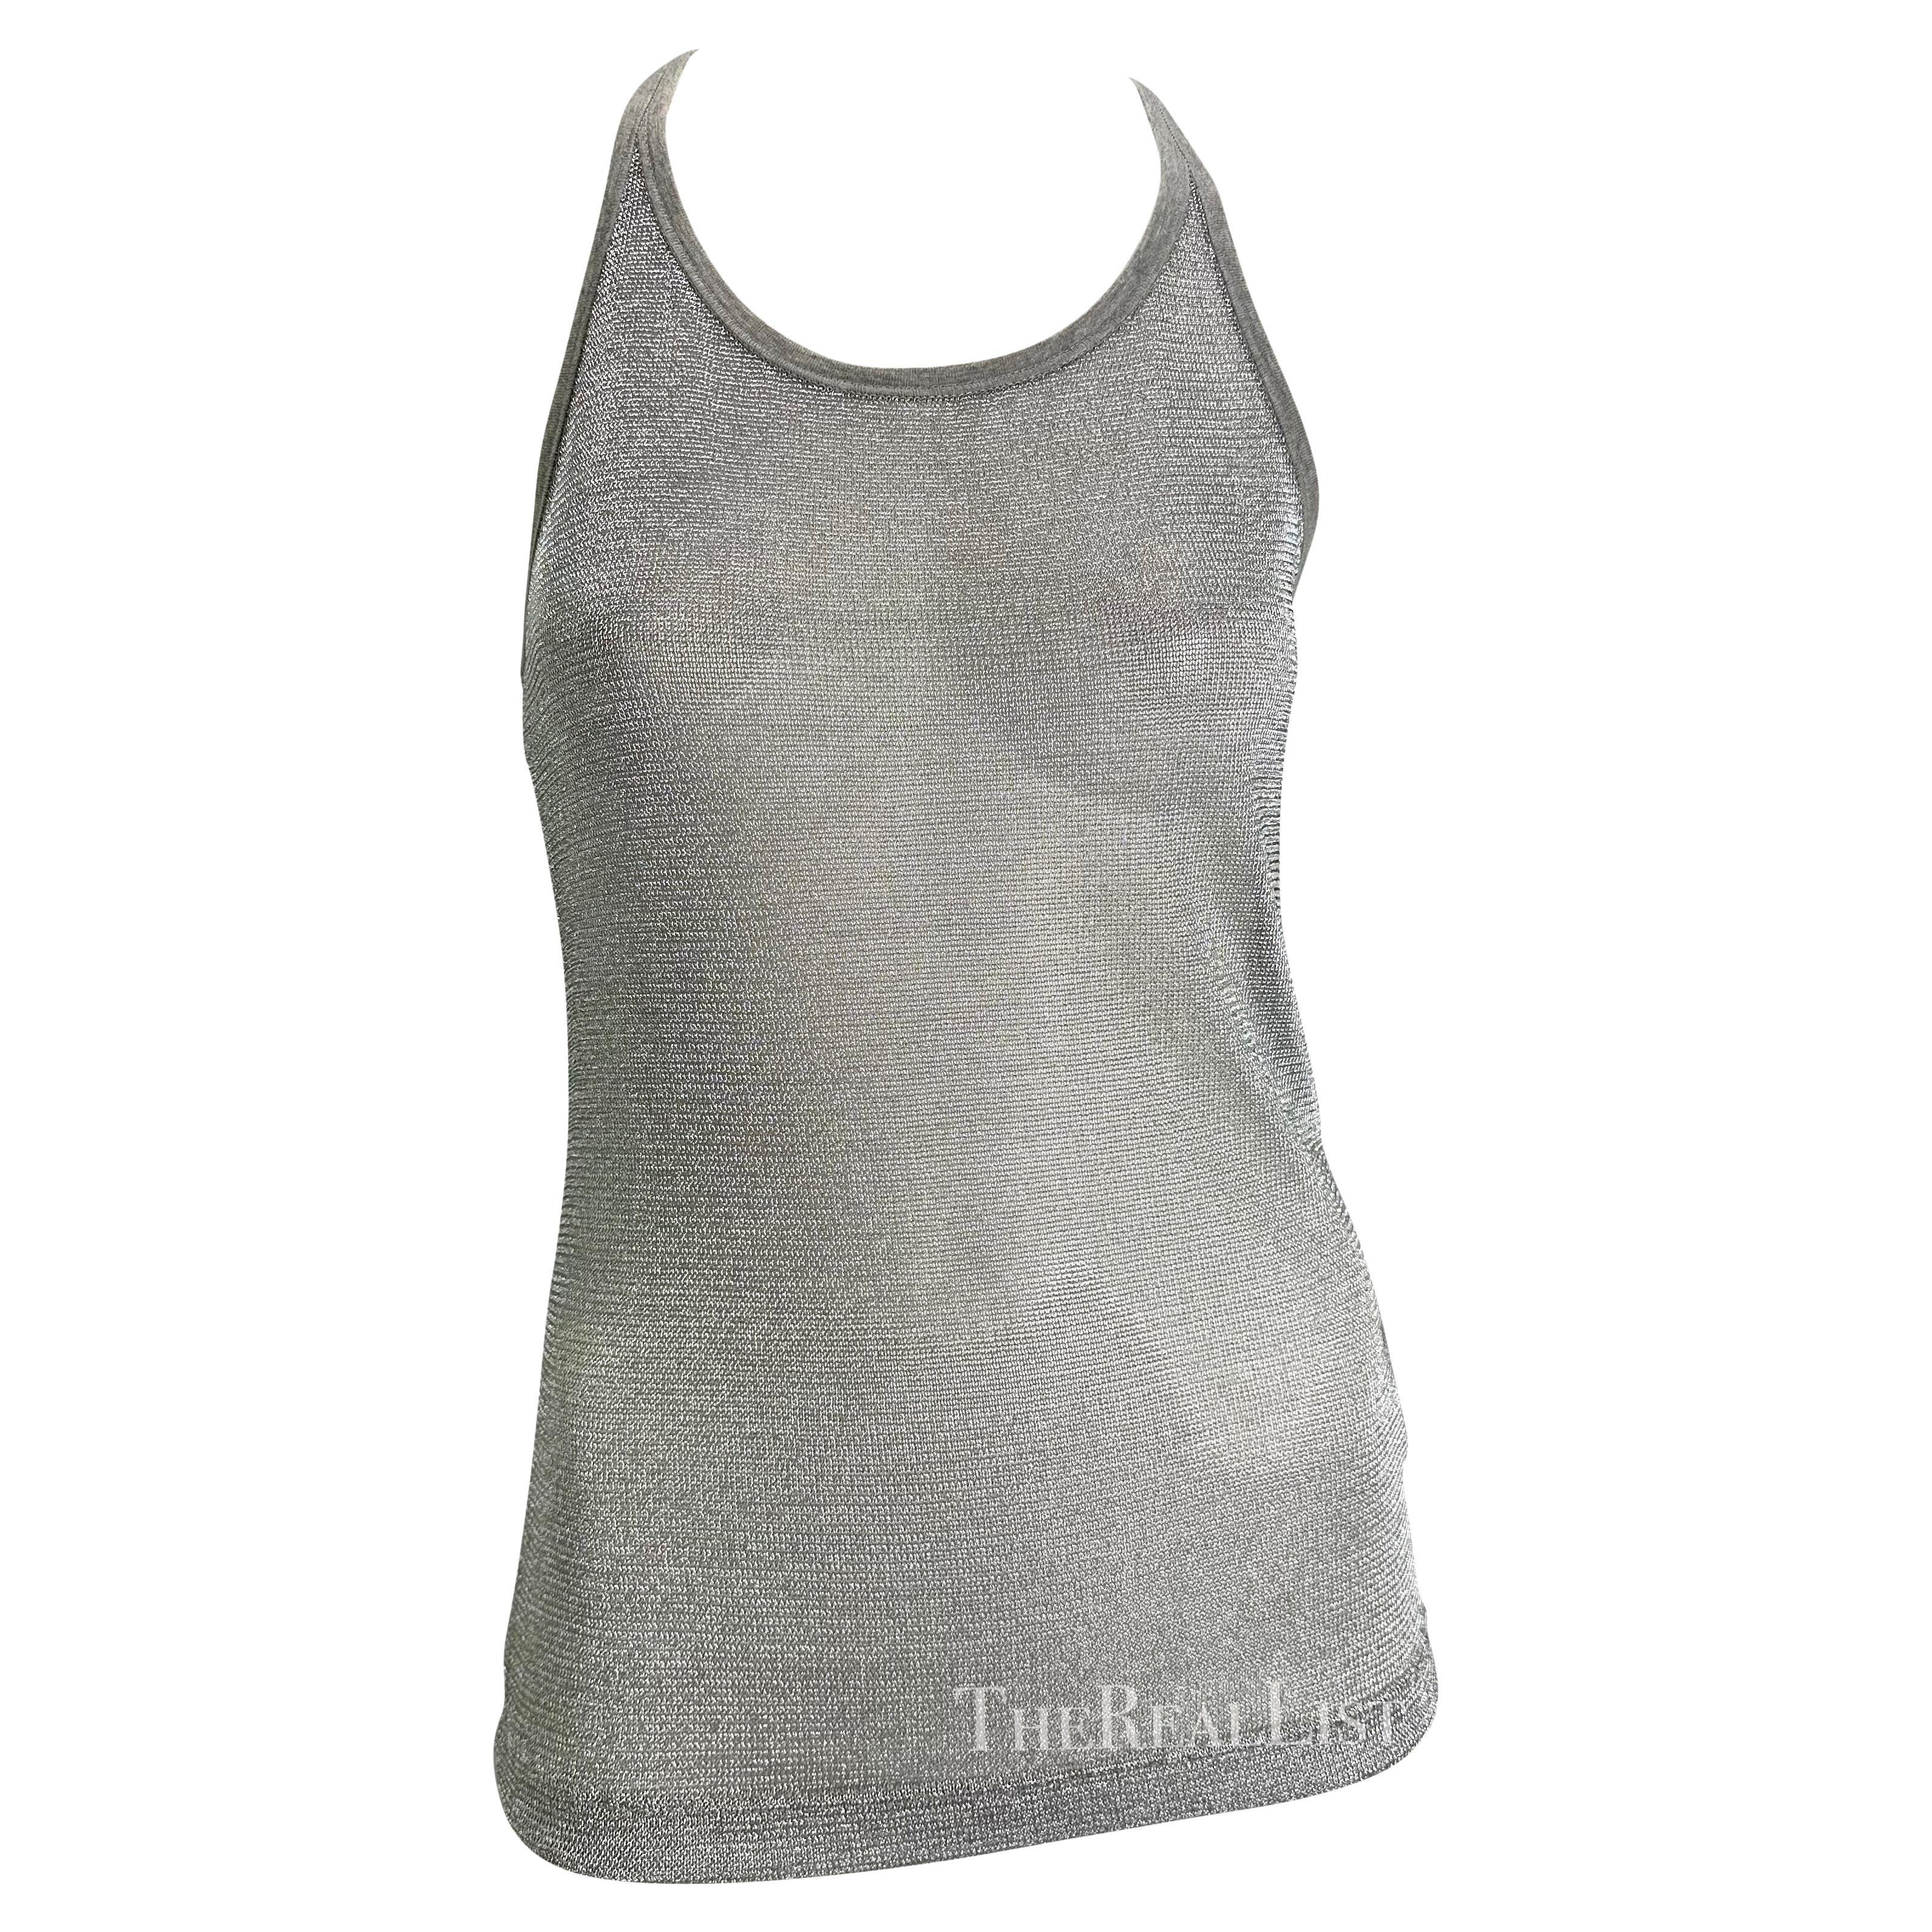 S/S 2003 Dolce & Gabbana Runway Ad Silver Woven Metal Mesh Racerback Tank Top  For Sale